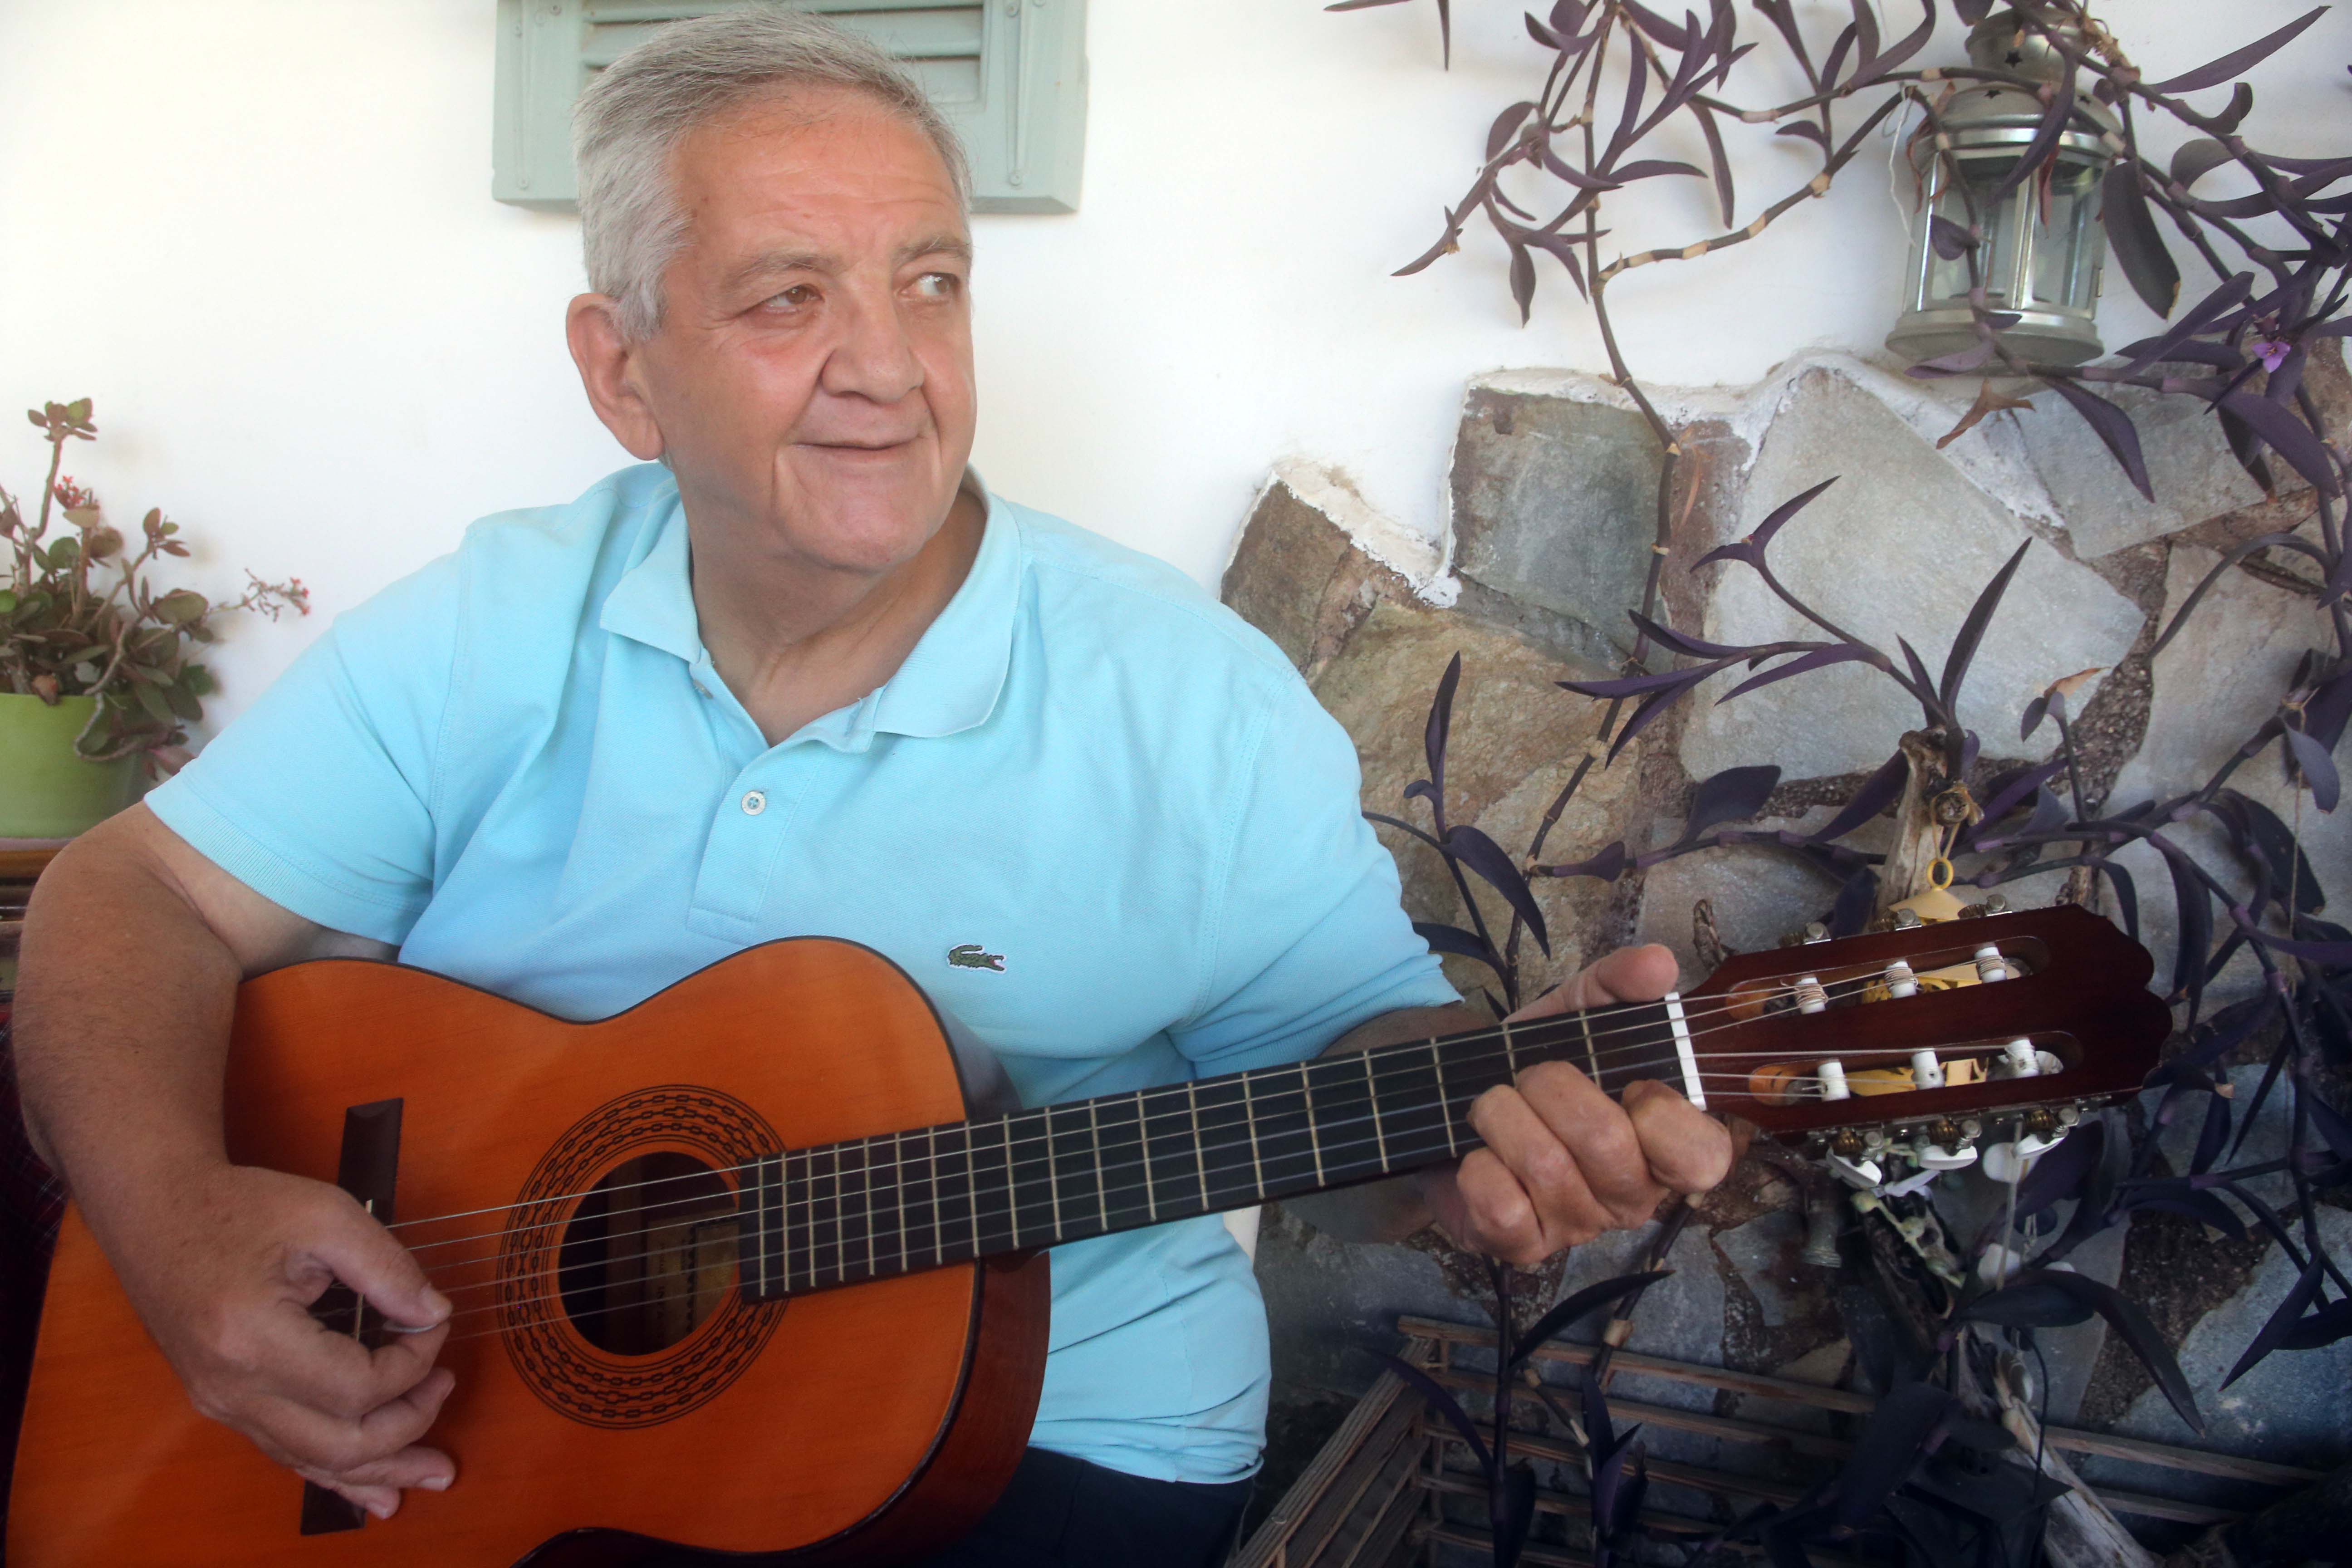 ‘In Cyprus you cannot live off music’